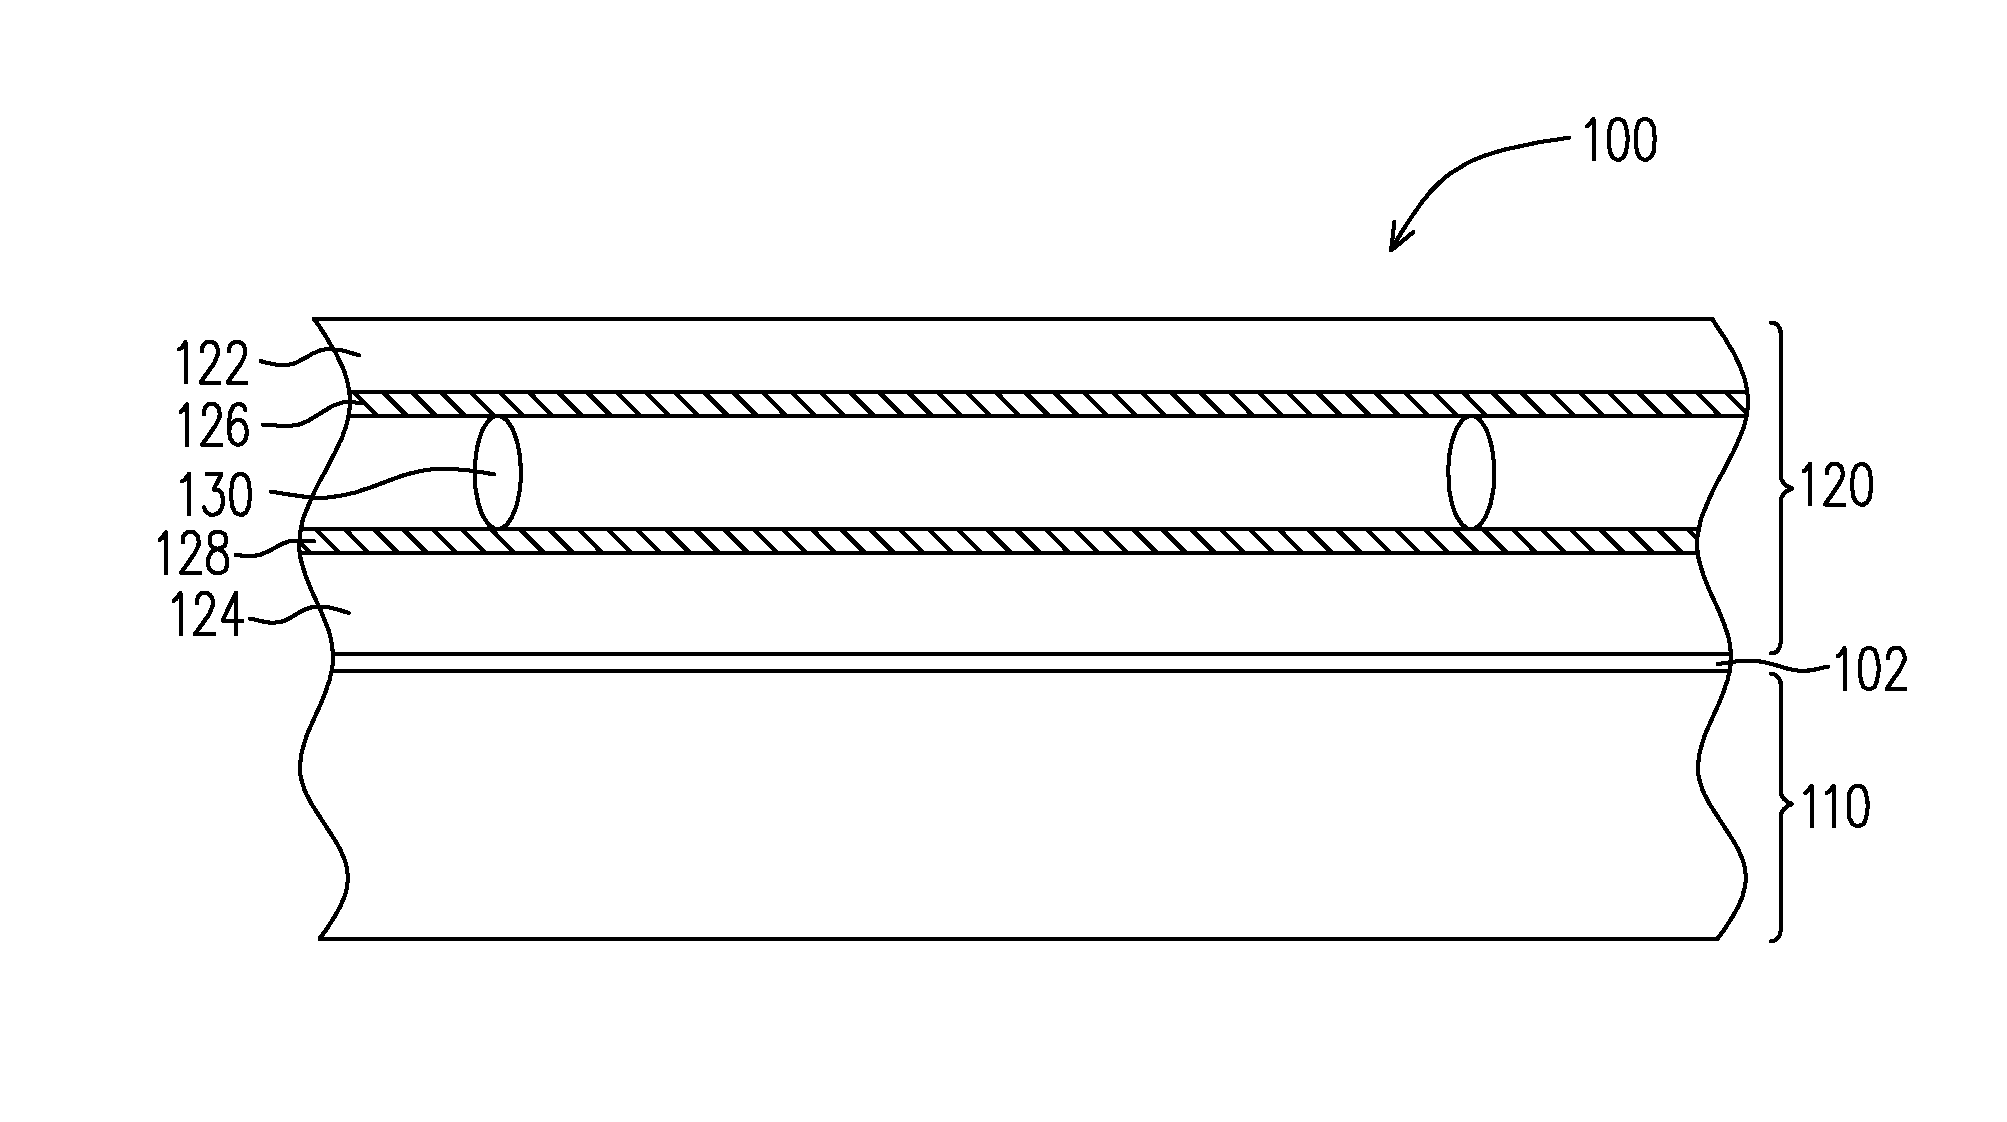 Touch-sensitive liquid crystal display device